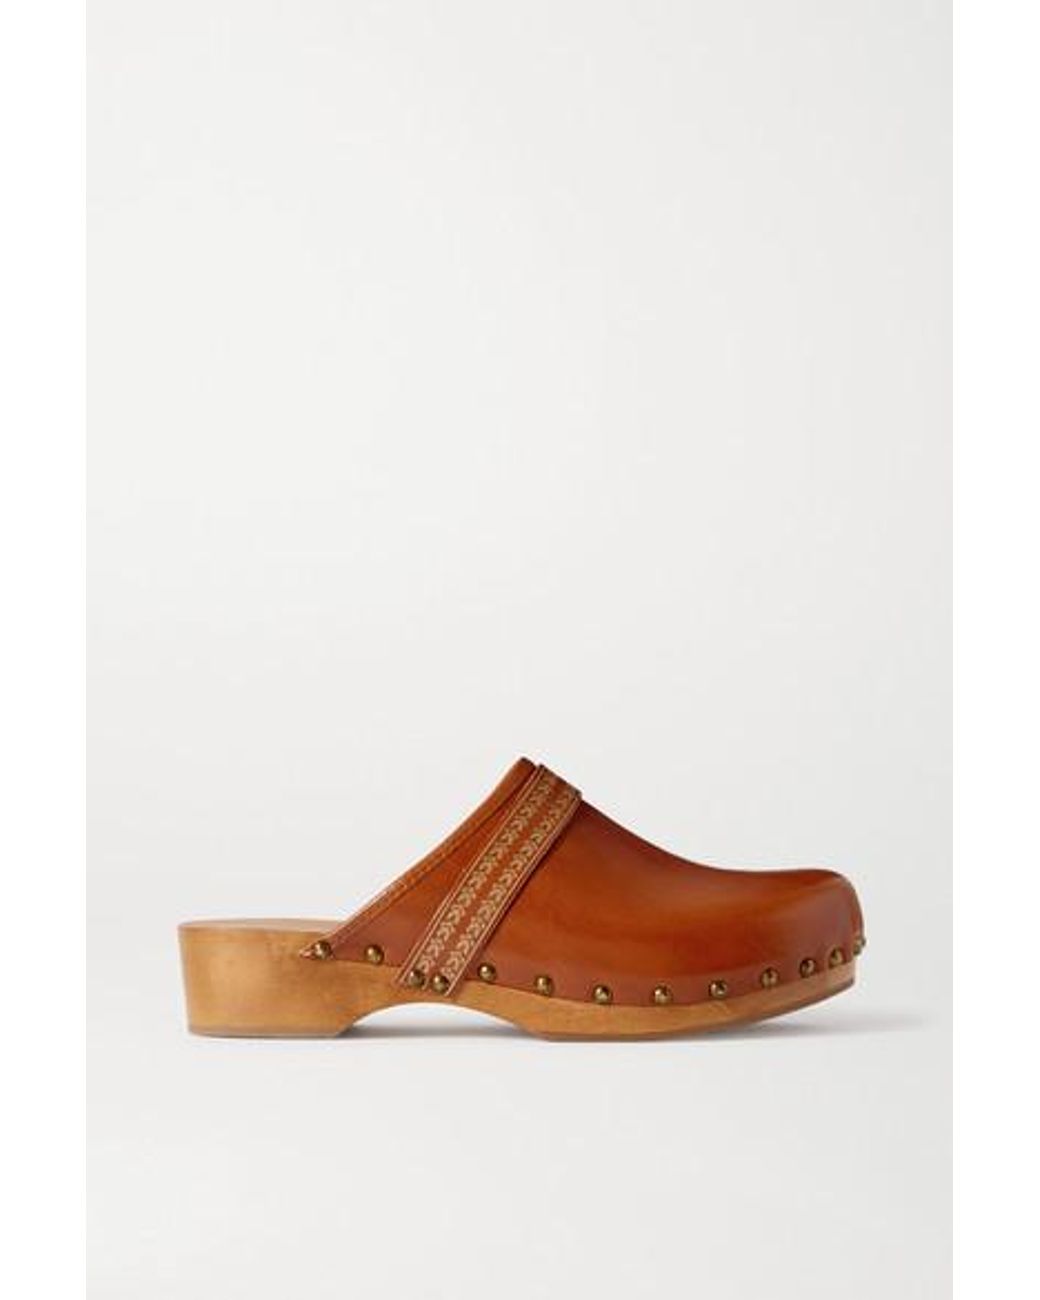 Isabel Marant Thalie Studded Leather Clogs in Tan (Brown) | Lyst